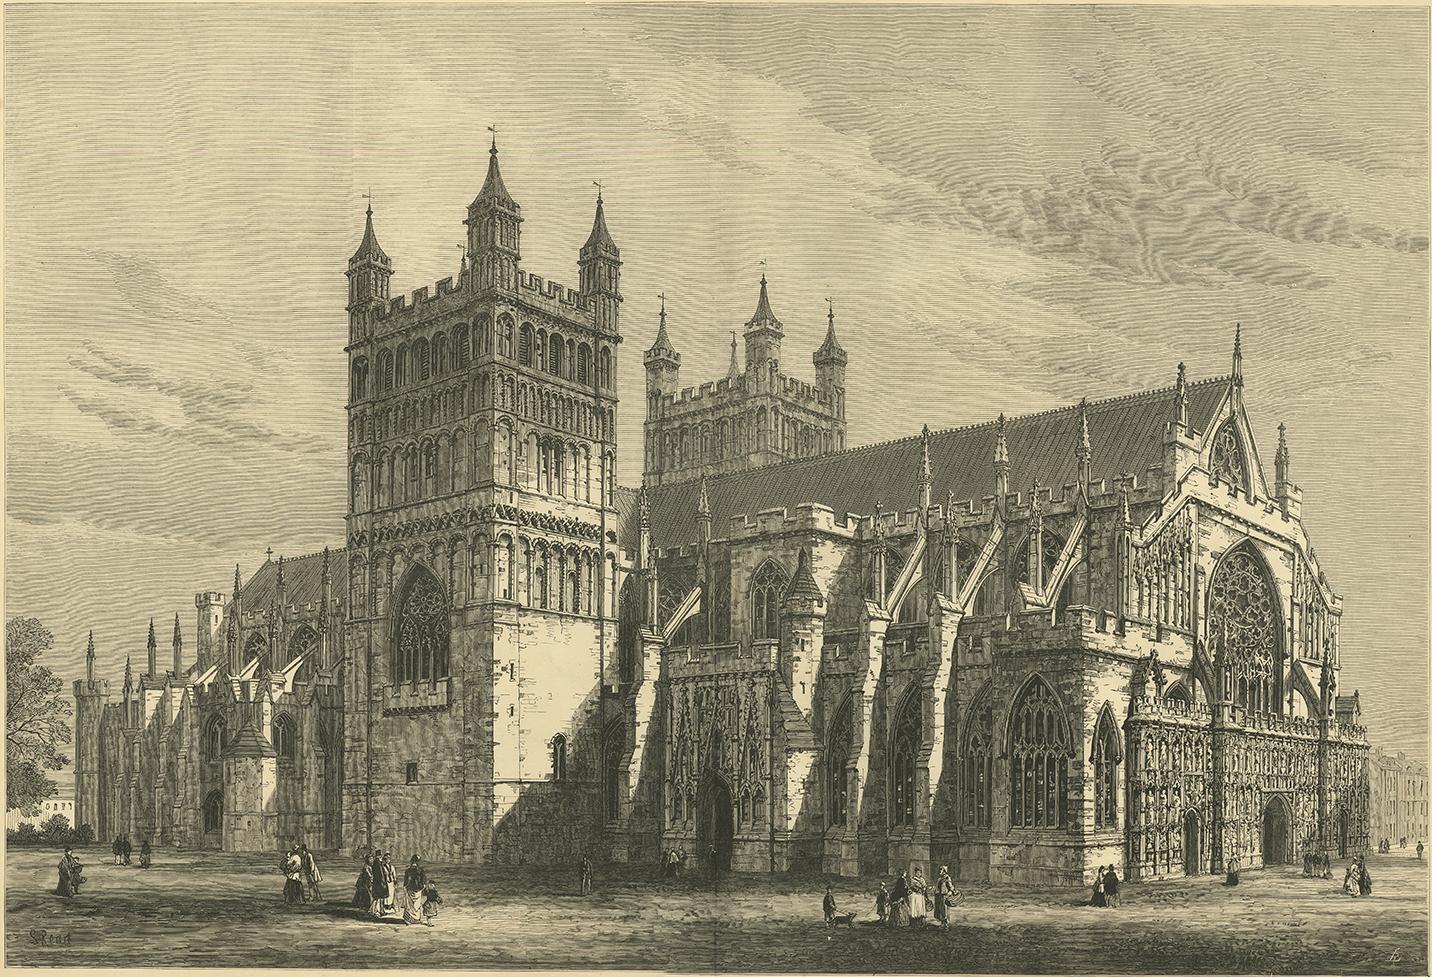 Original antique print of Exeter Cathedral. Exeter Cathedral, properly known as the Cathedral Church of Saint Peter at Exeter, is an Anglican cathedral, and the seat of the Bishop of Exeter, in the city of Exeter, Devon, in South West England. The